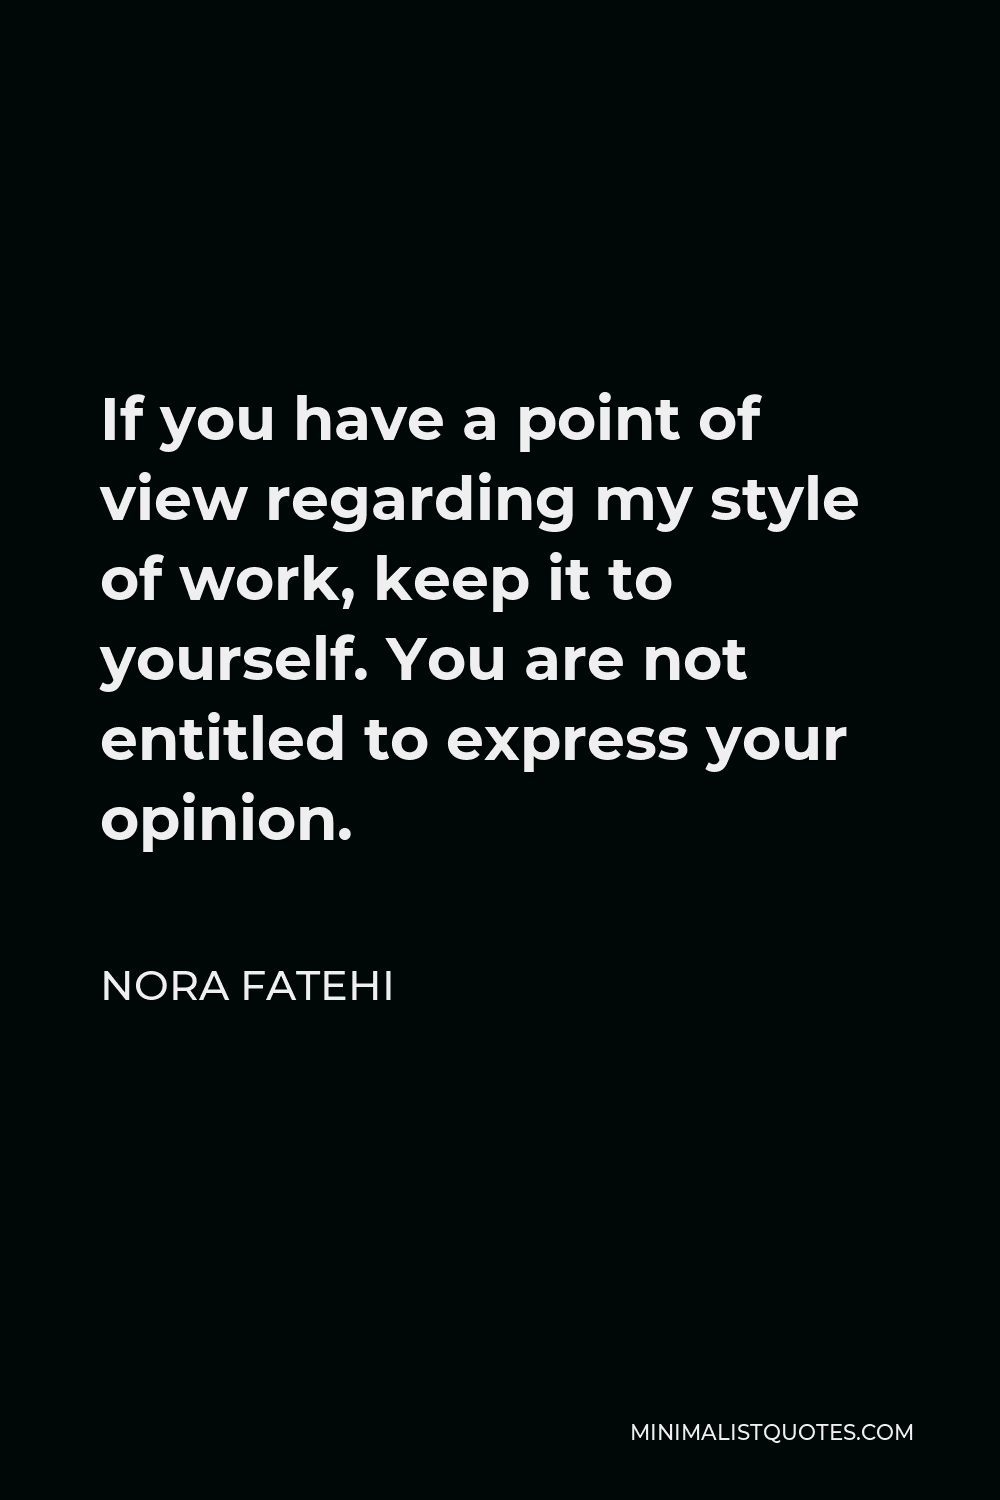 Nora Fatehi Quote - If you have a point of view regarding my style of work, keep it to yourself. You are not entitled to express your opinion.